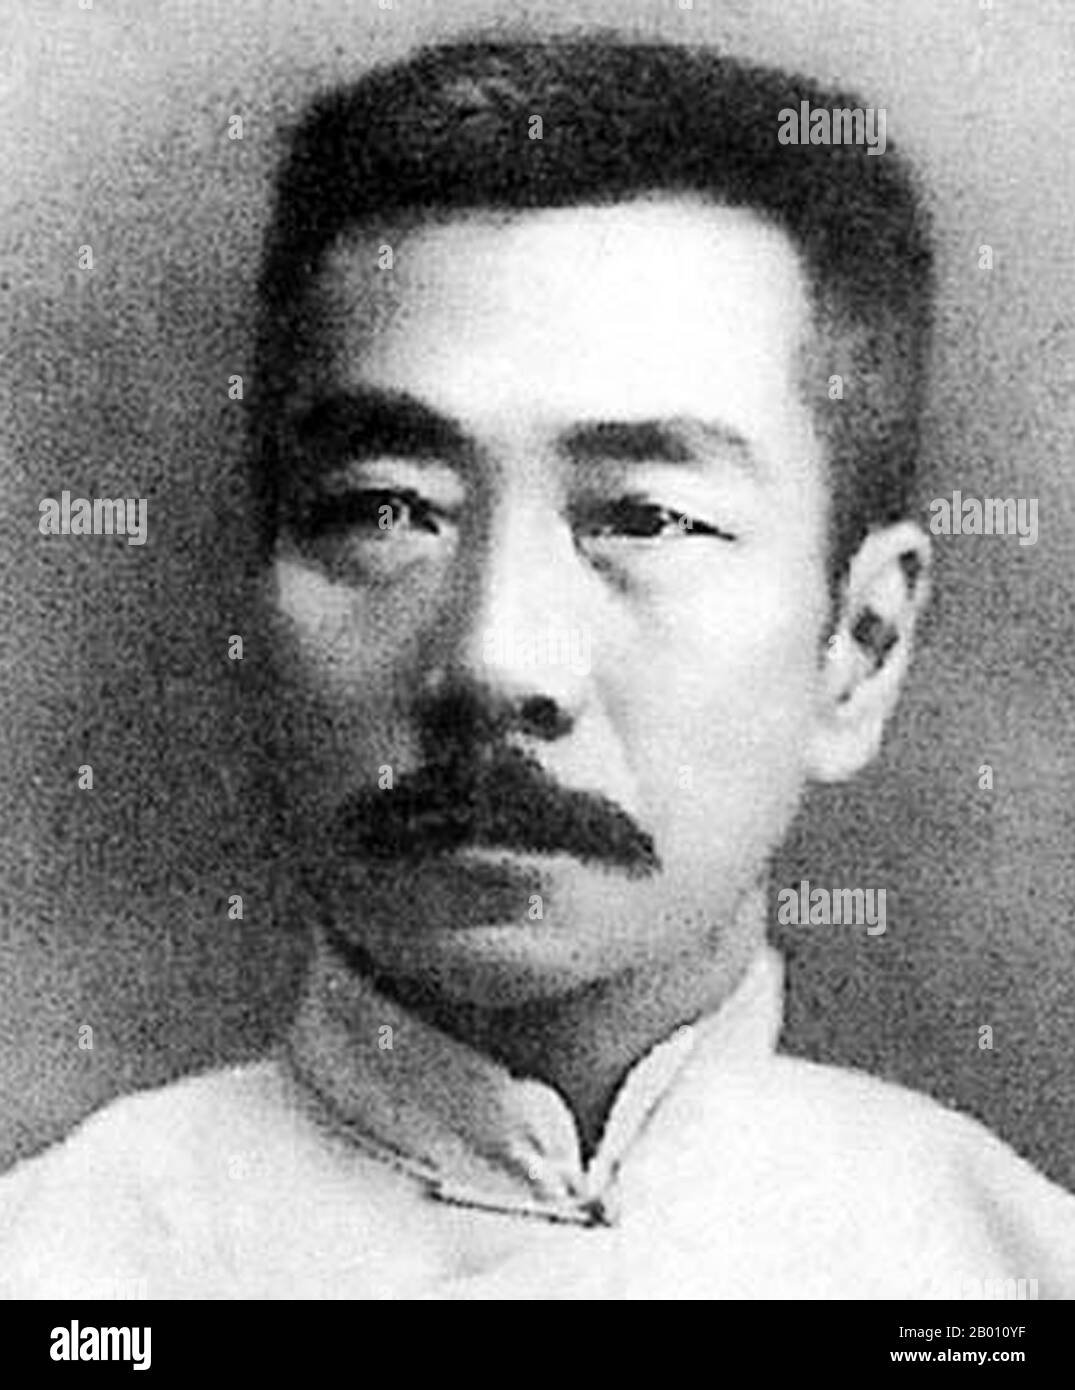 China: The Chinese writer Lu Xun (1881-1936), 20th century.  Lu Xun (or Lu Hsun), was the pen name of Zhou Shuren (Chou Shu-jen), September 25, 1881 – October 19, 1936. One of the major Chinese writers of the 20th century. Considered by many to be the founder of modern Chinese literature, he wrote in baihua (the vernacular) as well as classical Chinese. Lu Xun was a short story writer, editor, translator, critic, essayist and poet. In the 1930s he became the titular head of the Chinese League of the Left-Wing Writers in Shanghai. Stock Photo